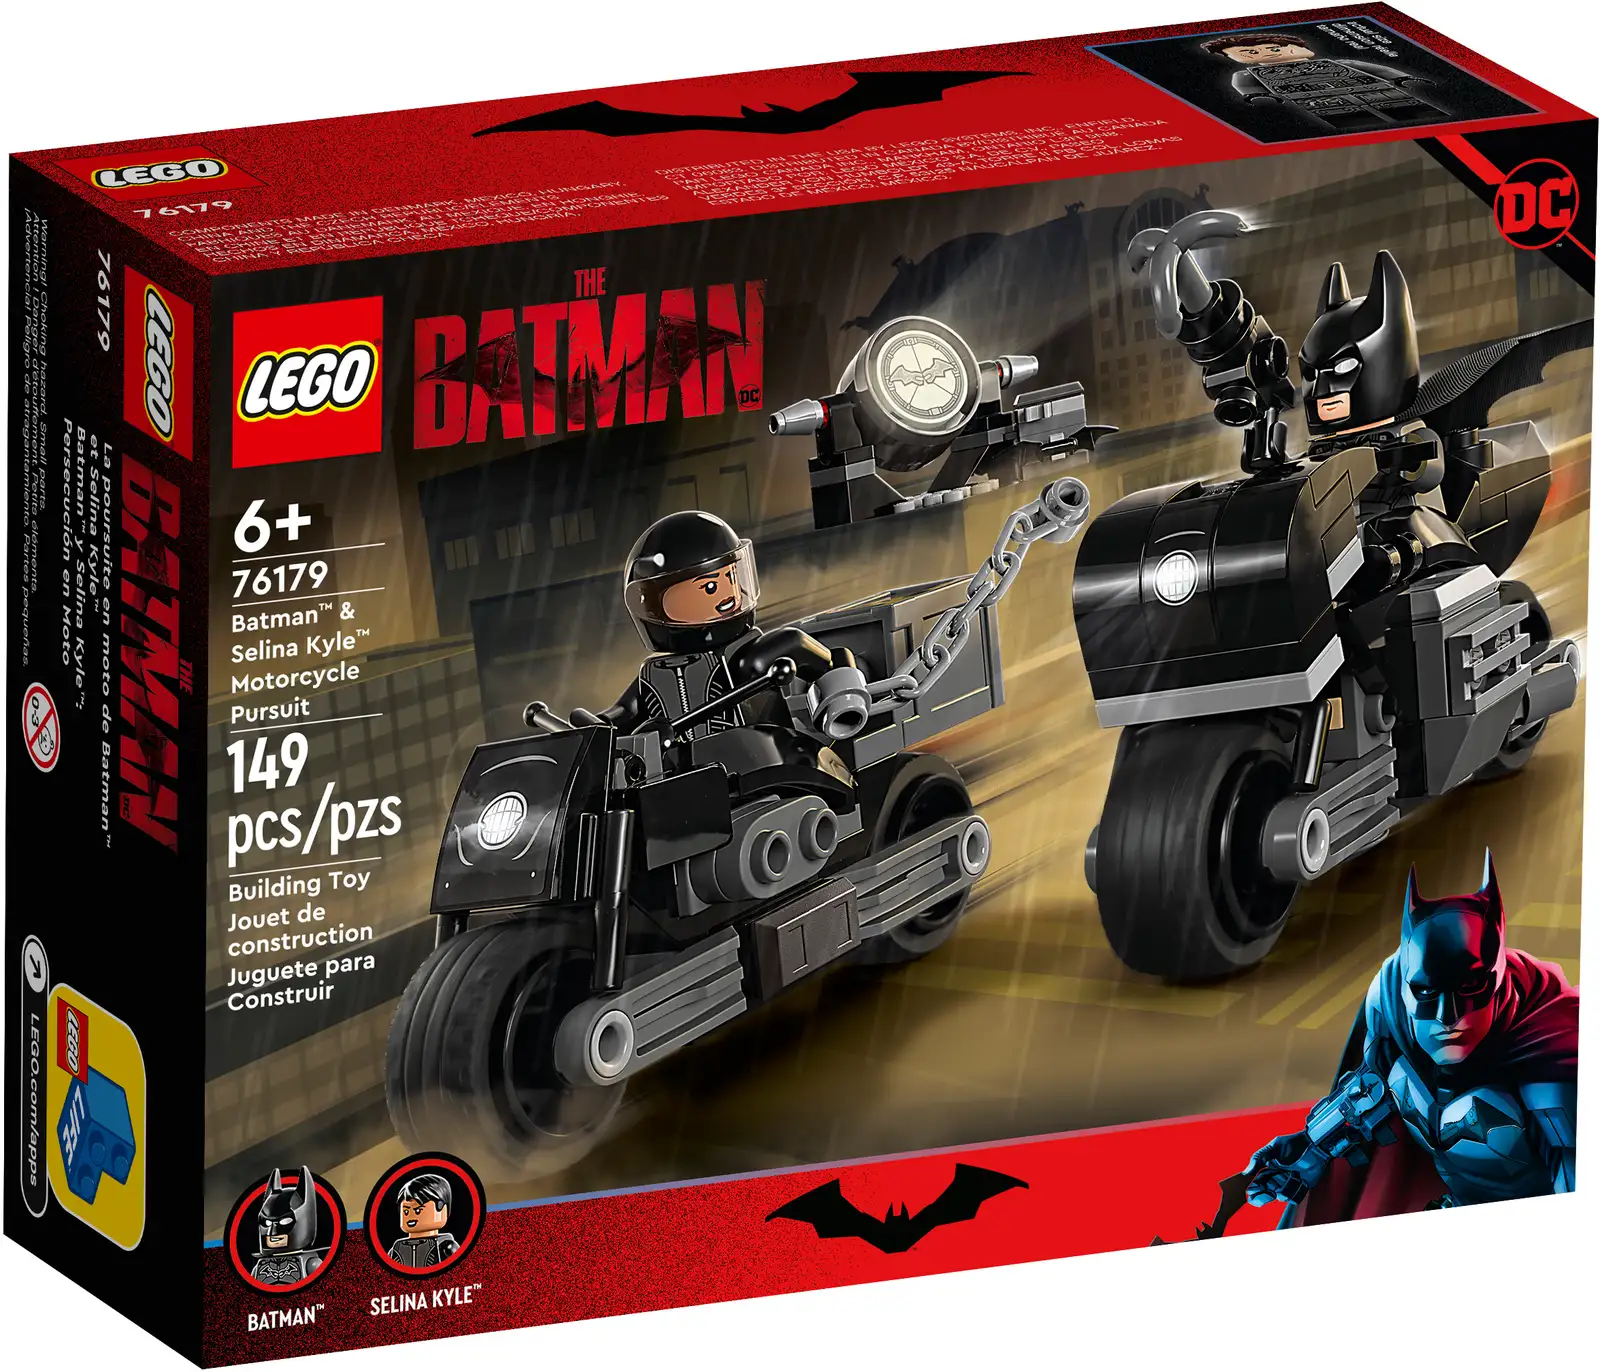 There’s double the fun for Batman™ fans aged 7+ with LEGO® DC Batman: Batman & Selina Kyle™ Motorcycle Pursuit (76179). This 2-motorcycle set is based on The Batman movie and is perfect for fans of fast-moving, super-hero adventures. Batman action – on wheels! Kids take their imaginations on a thrilling motorcycle ride with Batman and Selina Kyle. With 2 powerful-looking motorcycles and 2 minifigures, plus a Batarang™, grappling gun, chain and gem element, thrilling adventures will never be far away. A glow-in-the-dark Batsignal™ provides extra inspiration for endless super-hero stories. The free LEGO Building Instructions app contains an additional digital guide, which kids can use to zoom, rotate and visualize their model. There’s also a guided real-life building process that allows even younger builders to construct with confidence. Fast-moving action – The impressive, dual-motorcycle LEGO® DC Batman™: Batman & Selina Kyle™ Motorcycle Pursuit (76179) set puts the excitement of The Batman movie into kids’ hands 2 minifigures – Includes Batman™, with a fabric cape, and Selina Kyle™ minifigures, a Batarang™, grappling gun, chain, gem element and a glow-in-the-dark Batsignal™ Hands-on fun – Kids take their imaginations on a thrilling motorcycle ride with Batman™ and Selina Kyle™, enjoying endless super-hero adventures as they go Ideal for kids aged 7 and up – This versatile playset makes a great gift for Batman™ fans and any young motorcycle enthusiast Portable play – With Batman’s motorcycle measuring over 1 in. (4 cm) high, 3 in. (9 cm) long and 1 in. (3 cm) wide, this versatile playset is the perfect size to carry wherever kids want to play Additional in-app features – With the LEGO® Building Instructions app, kids can zoom, rotate and visualize a digital version of their model as they build More creative fun – All LEGO® DC building toys provide young super heroes with premium-quality playsets designed to deliver endless imaginative play possibilities Quality guaranteed – LEGO® components fulfill stringent industry quality standards to ensure they are consistent, compatible and connect and pull apart perfectly every time Safety assured – LEGO® components are dropped, heated, crushed, twisted and analyzed to make sure they satisfy rigorous global safety standards